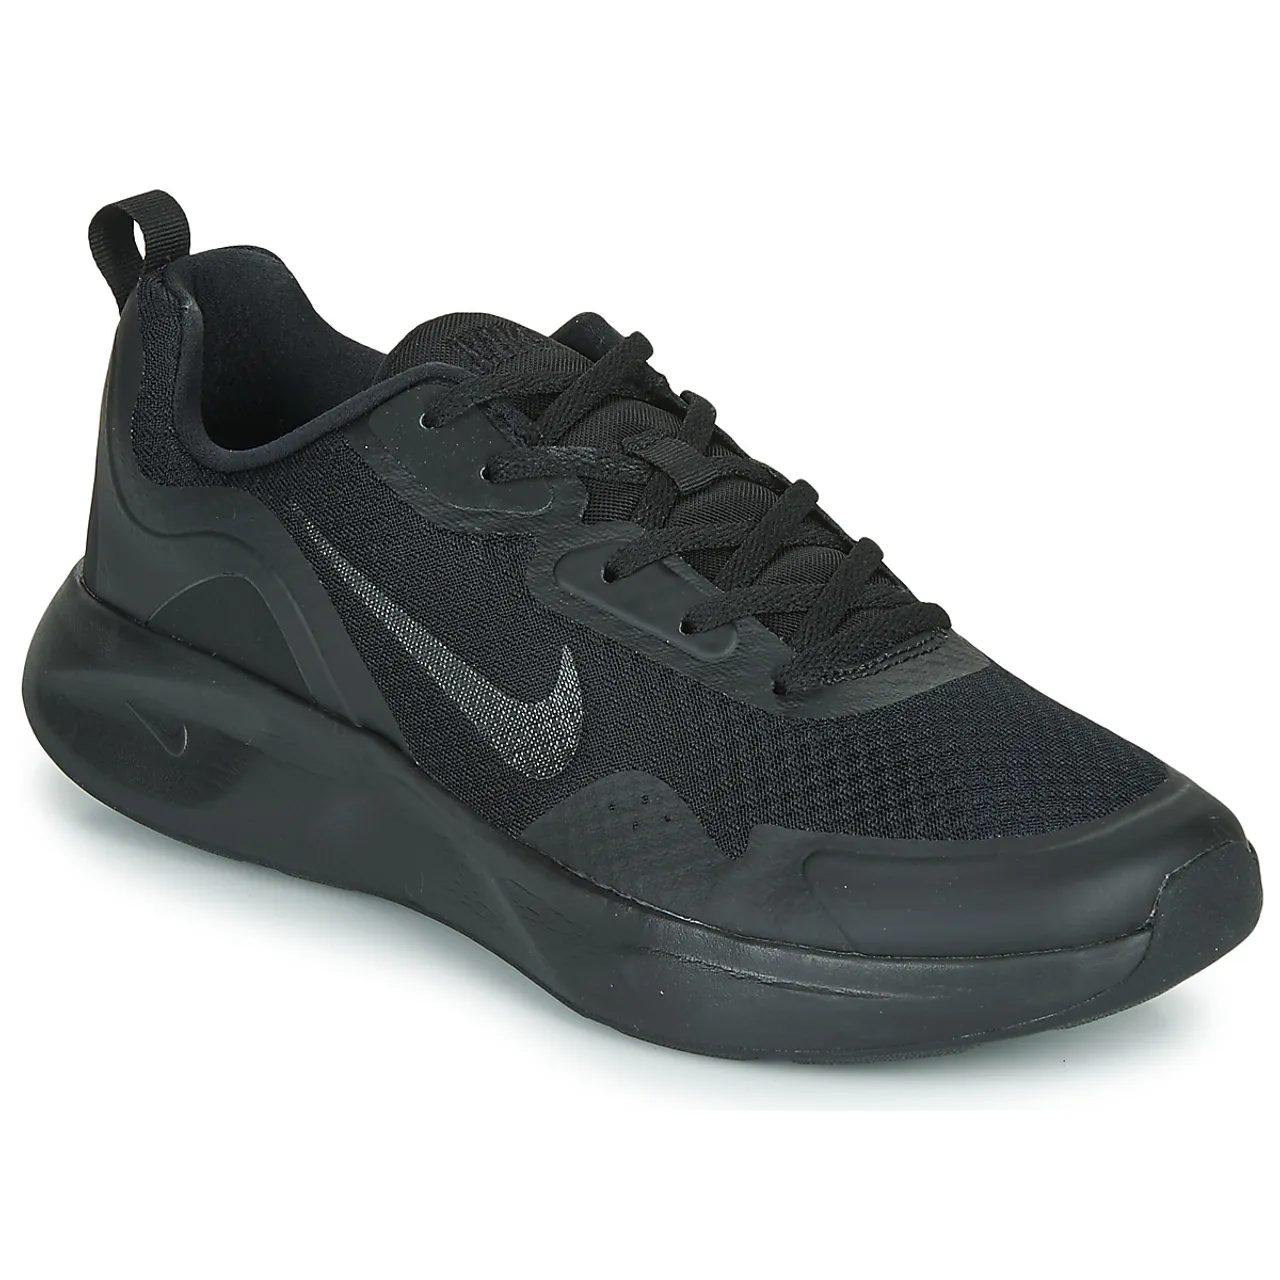 Nike  WEARALLDAY  men's Sports Trainers (Shoes) in Black